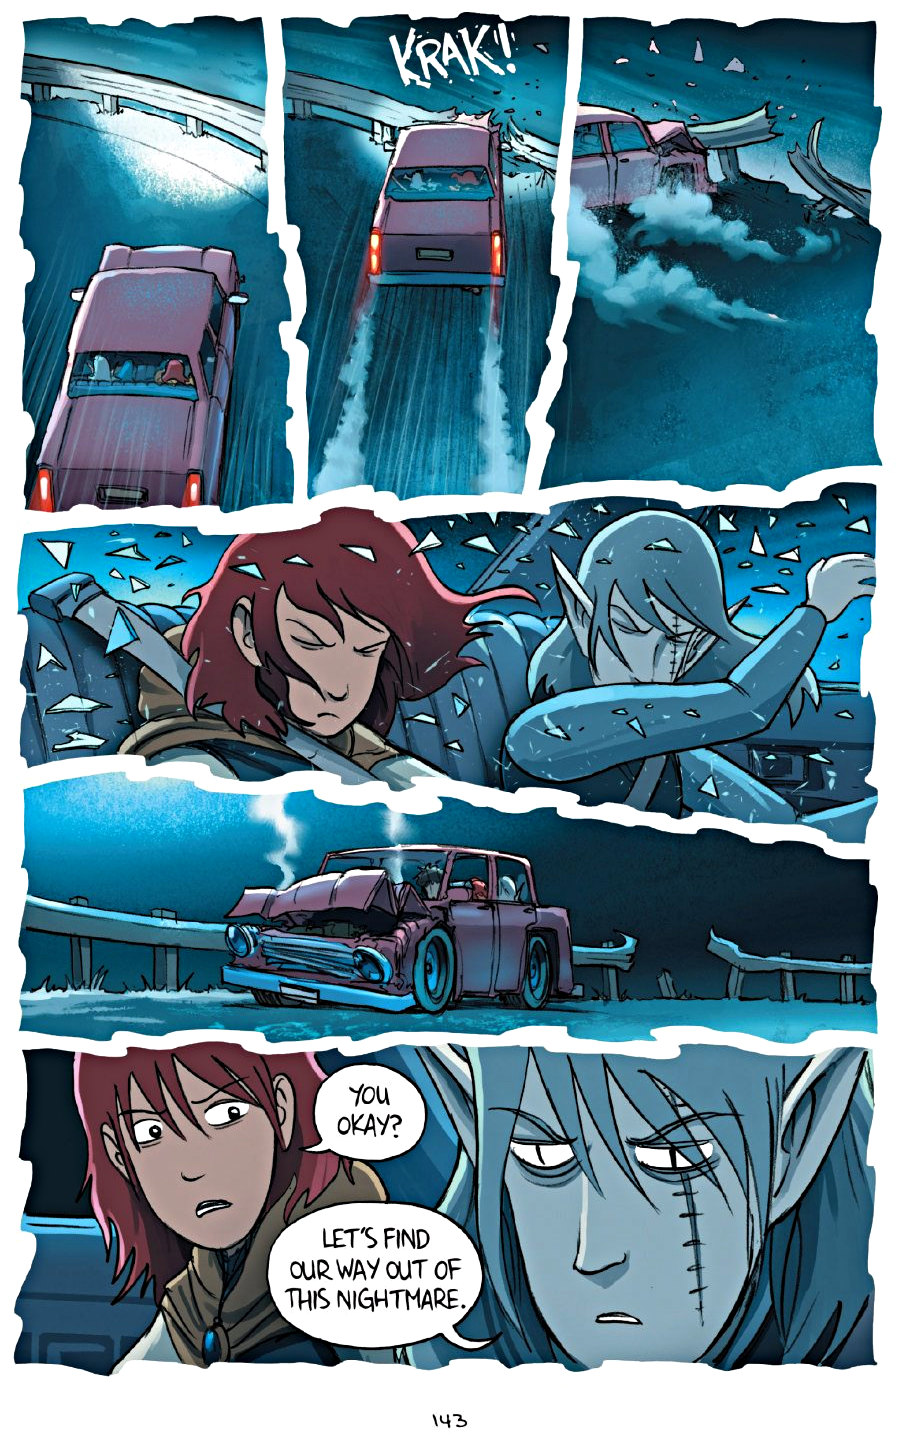 page 143 of amulet 7 firelight graphic novel